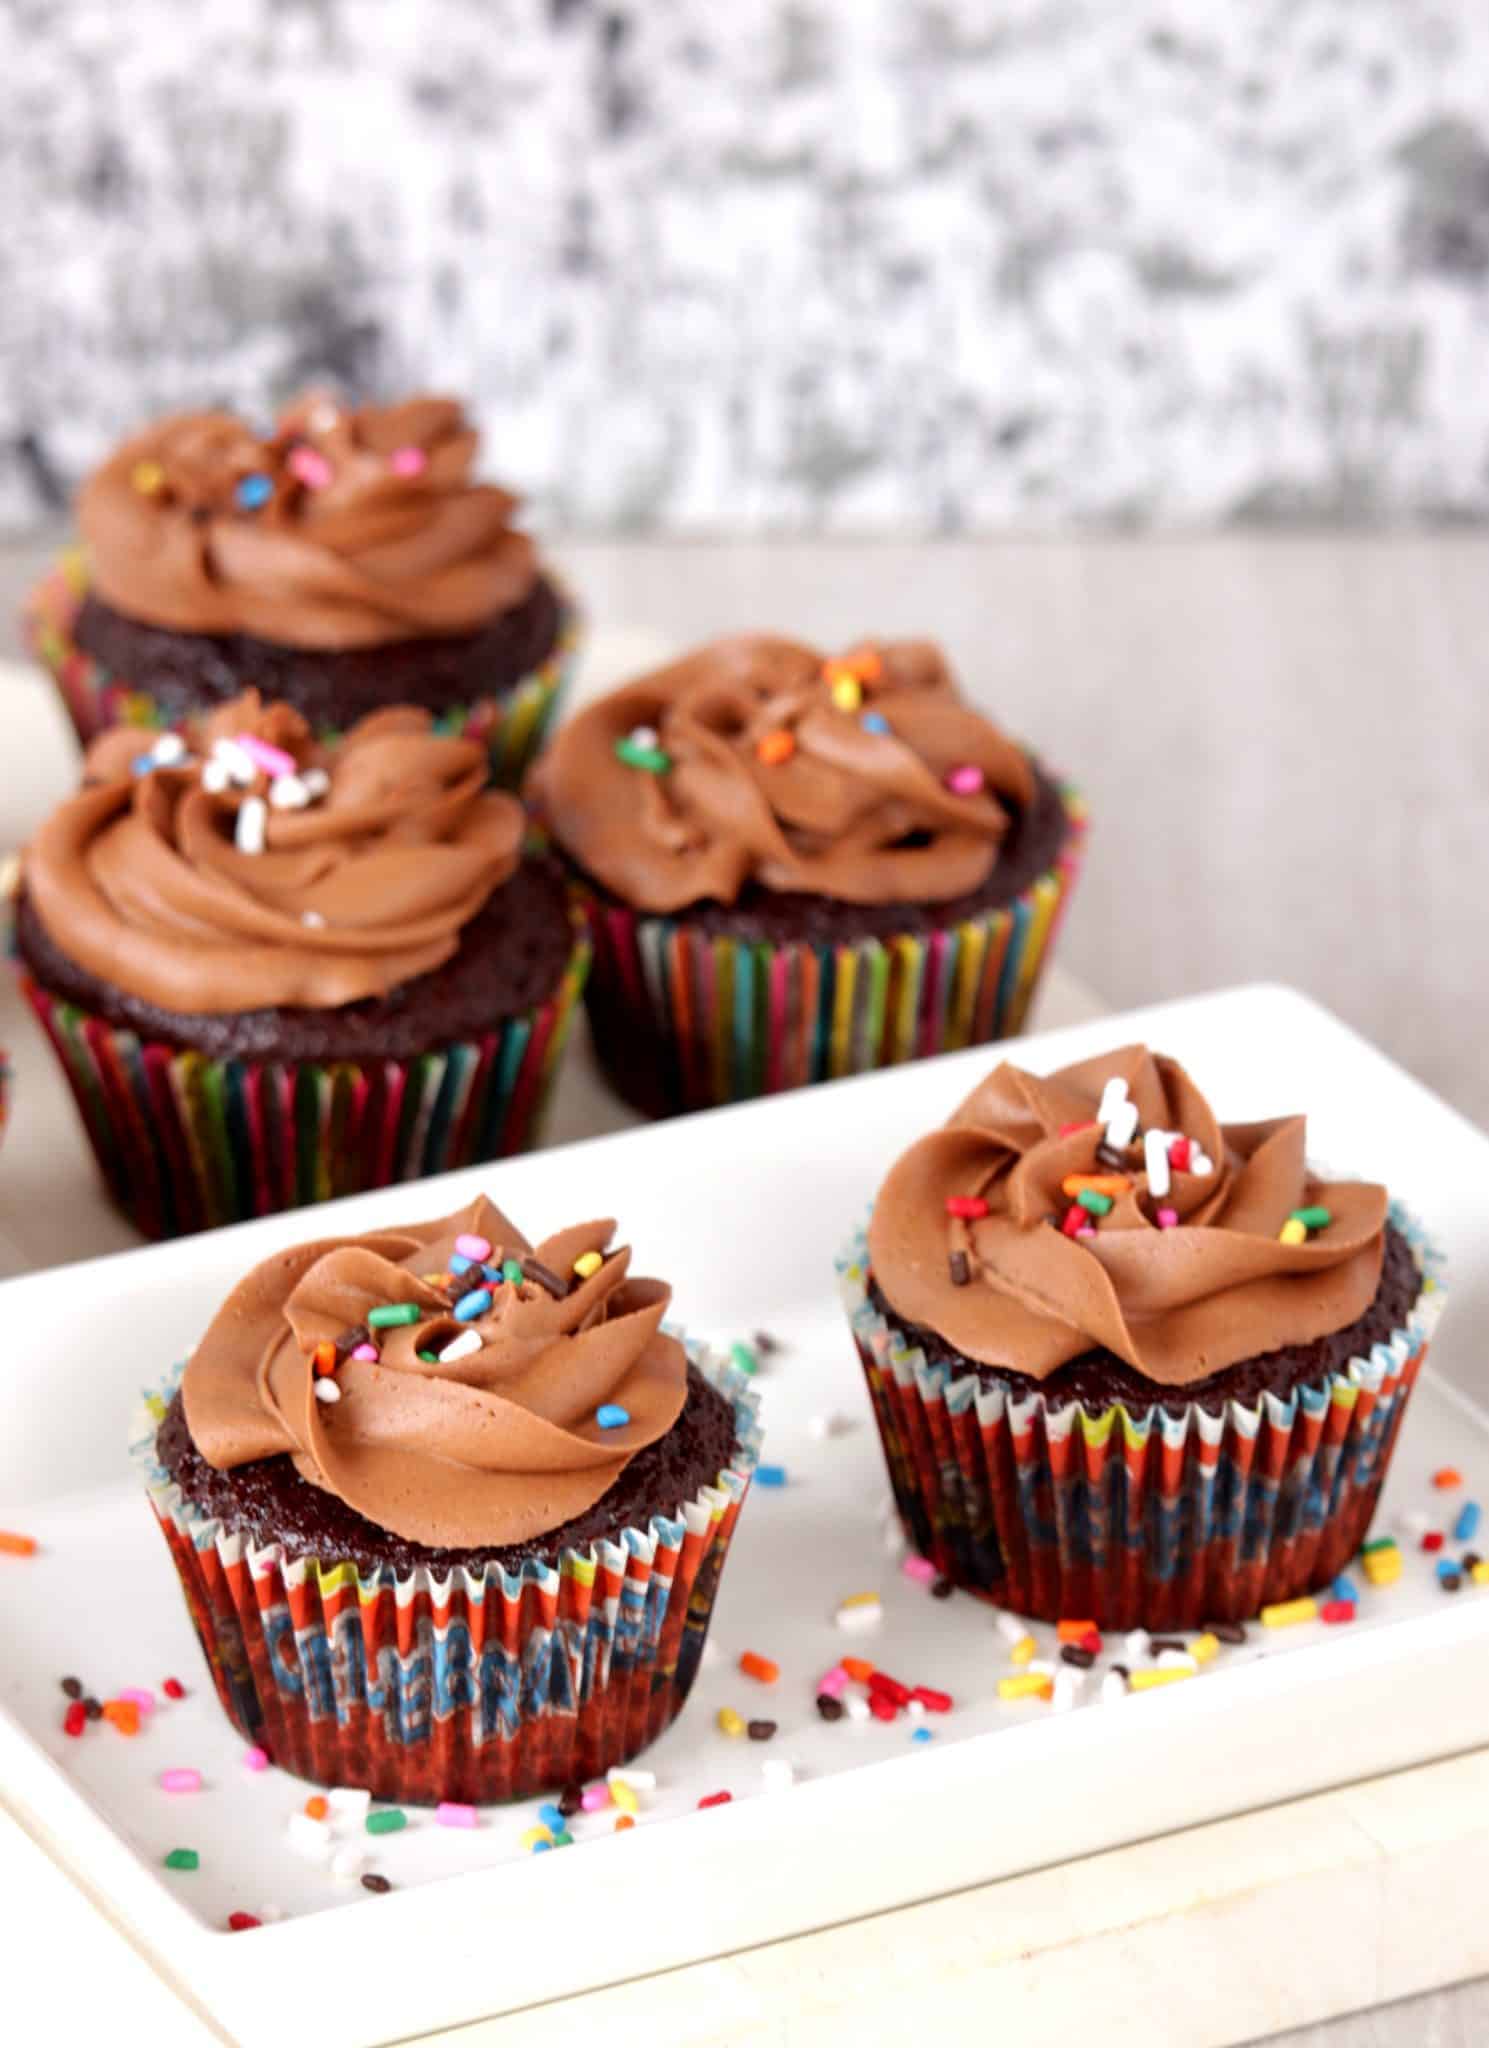 C for Chocolate Cupcakes with Chocolate Buttercream Frosting is ready 